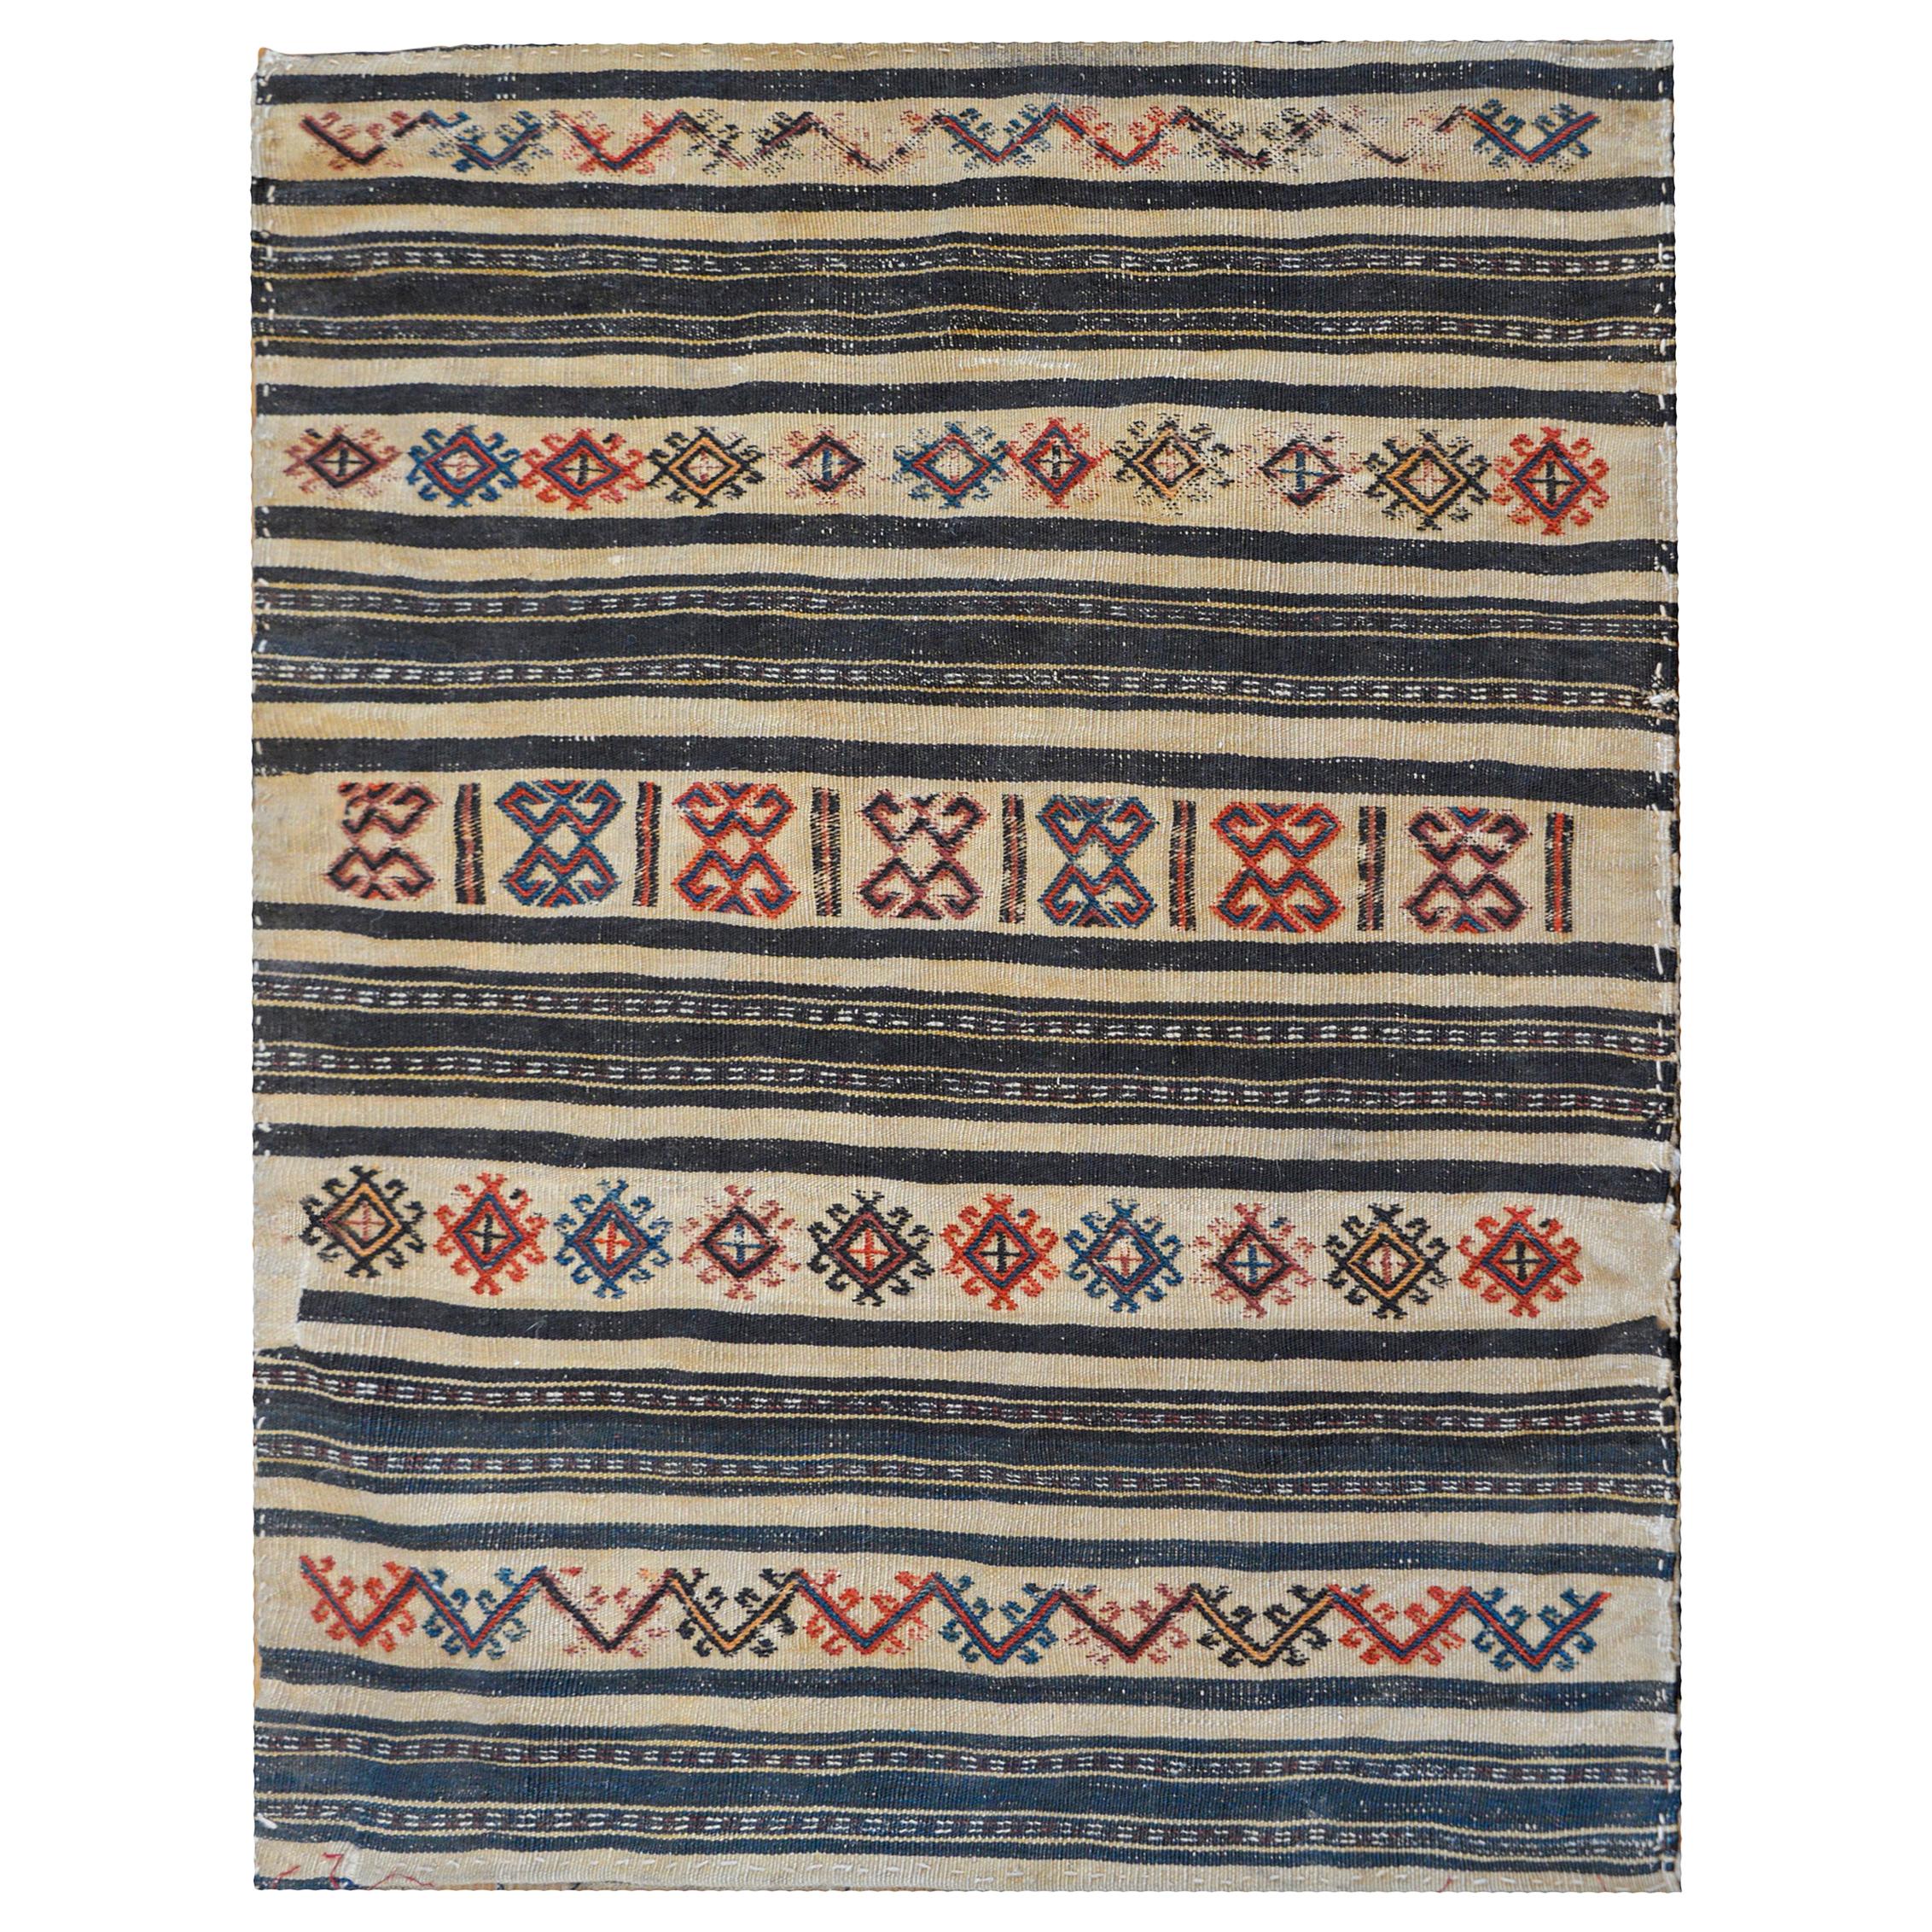 Beautiful Early 20th Century Afshar Grain Bag For Sale